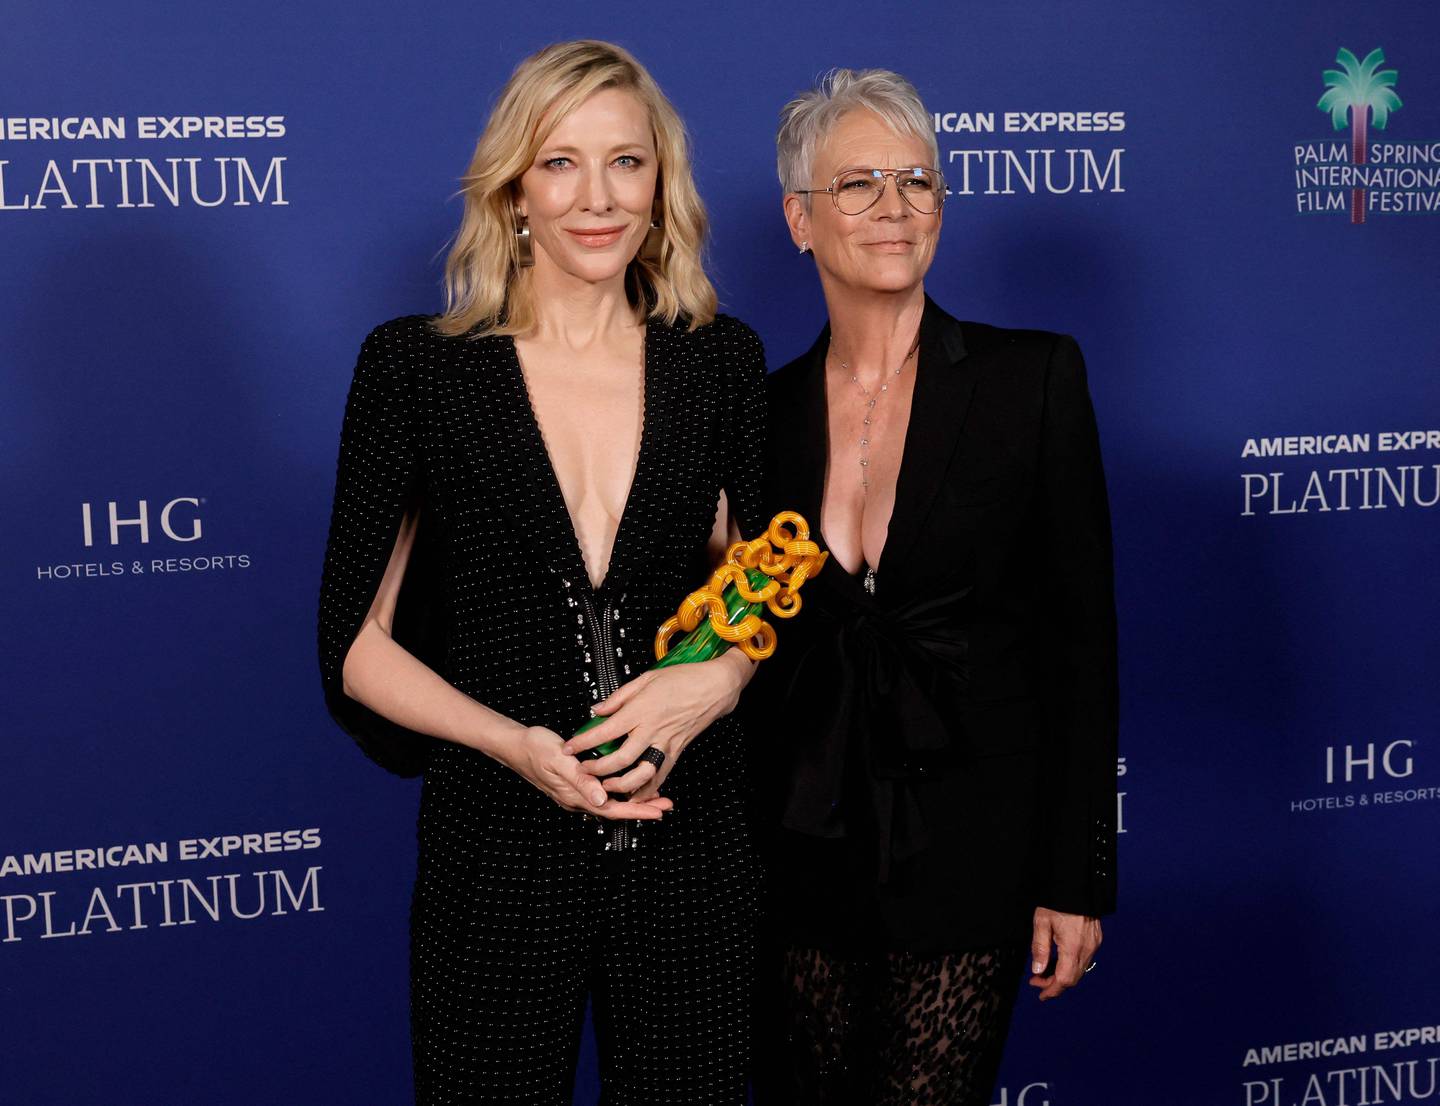 Cate Blanchett and Jamie Lee Curtis at the Palm Springs International Film Festival Awards Night Gala. AFP 